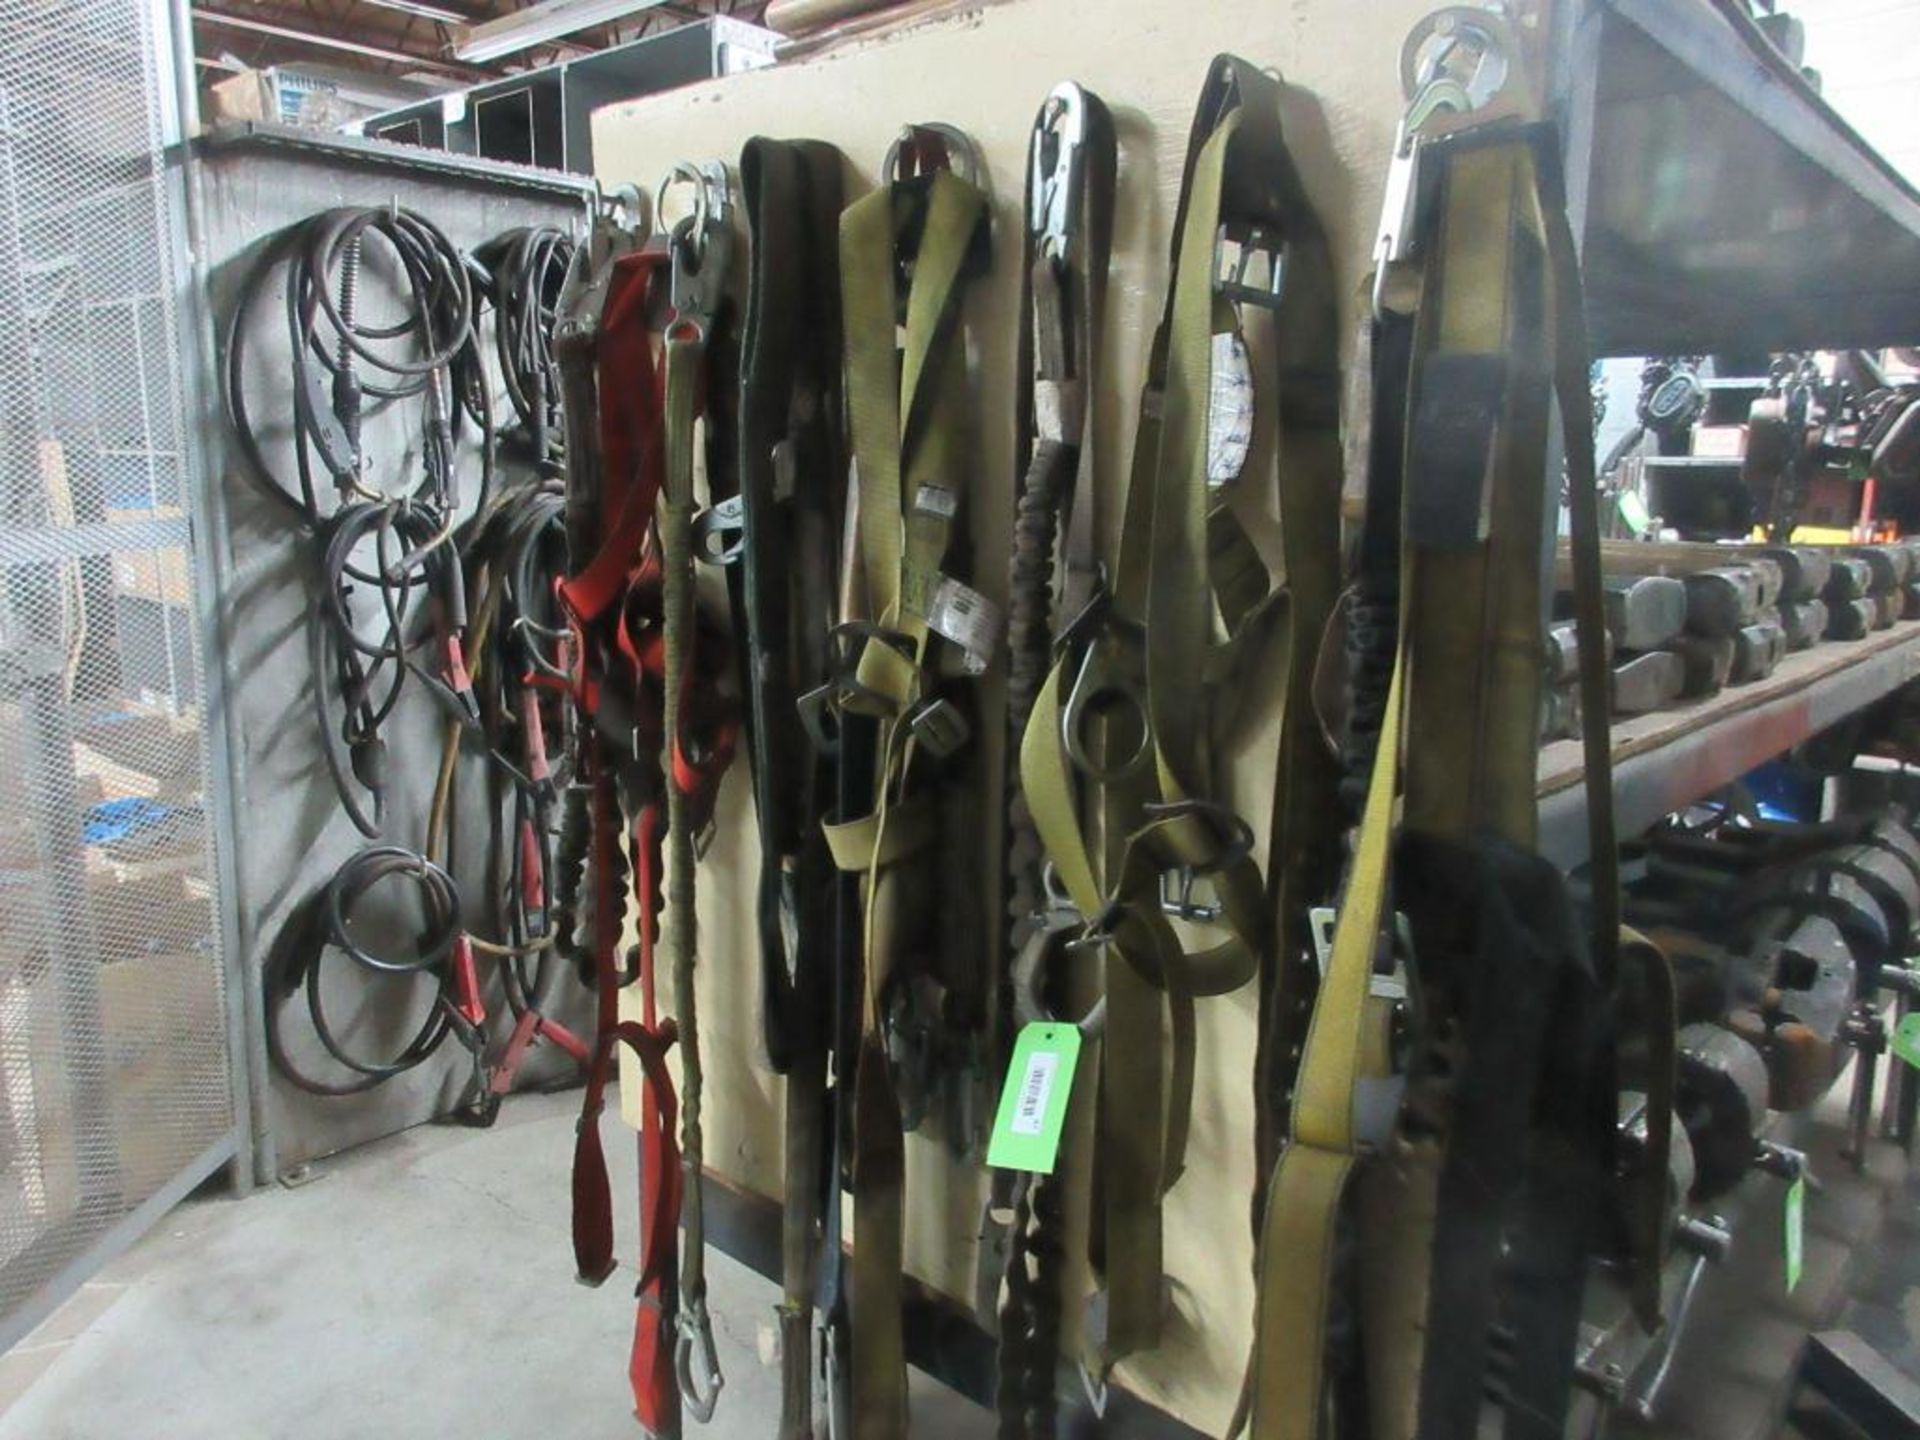 LOT OF HARNESSES AND STRAPS (IN CENTRAL TOOL CRIB)